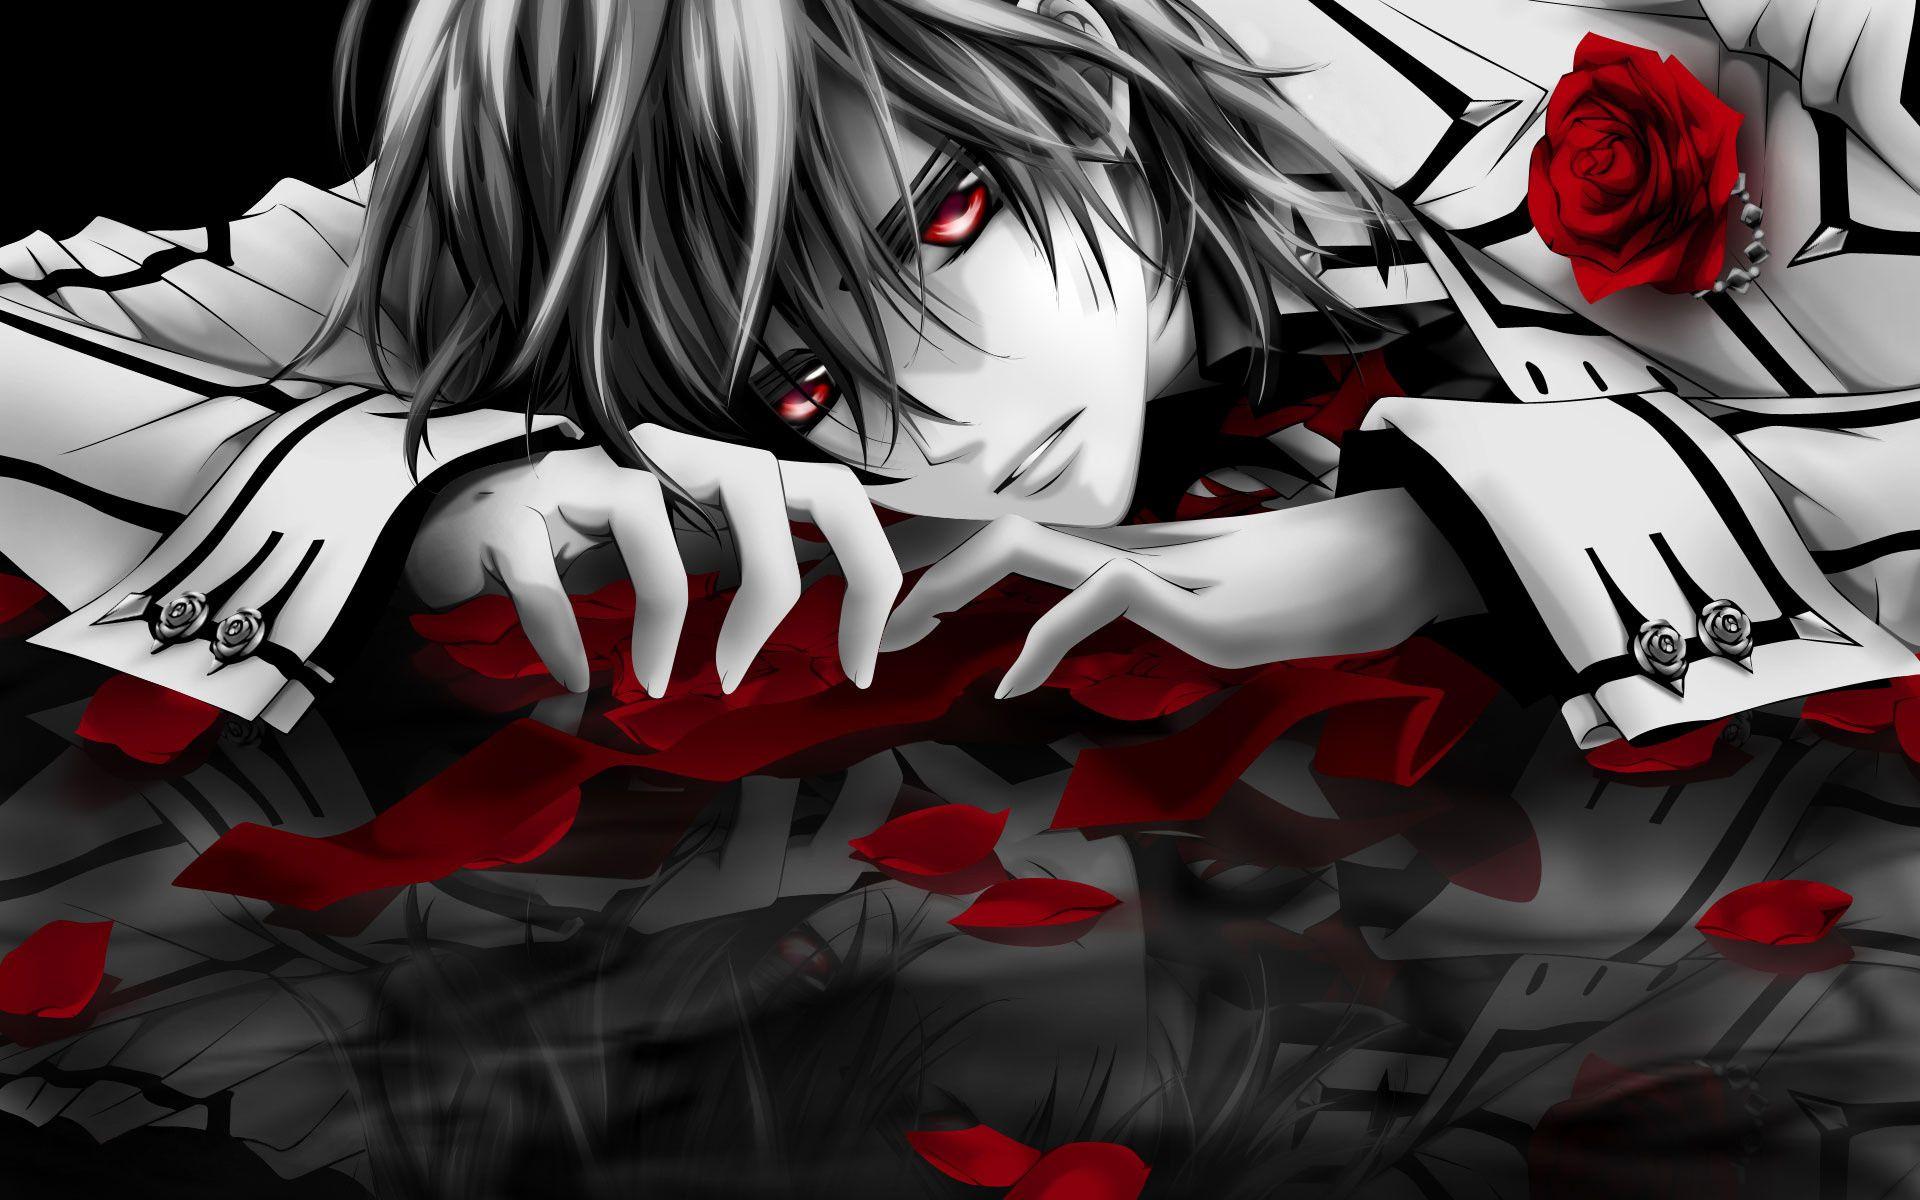 Gothic Anime Vampire Boys Wallpapers Wallpaper Cave